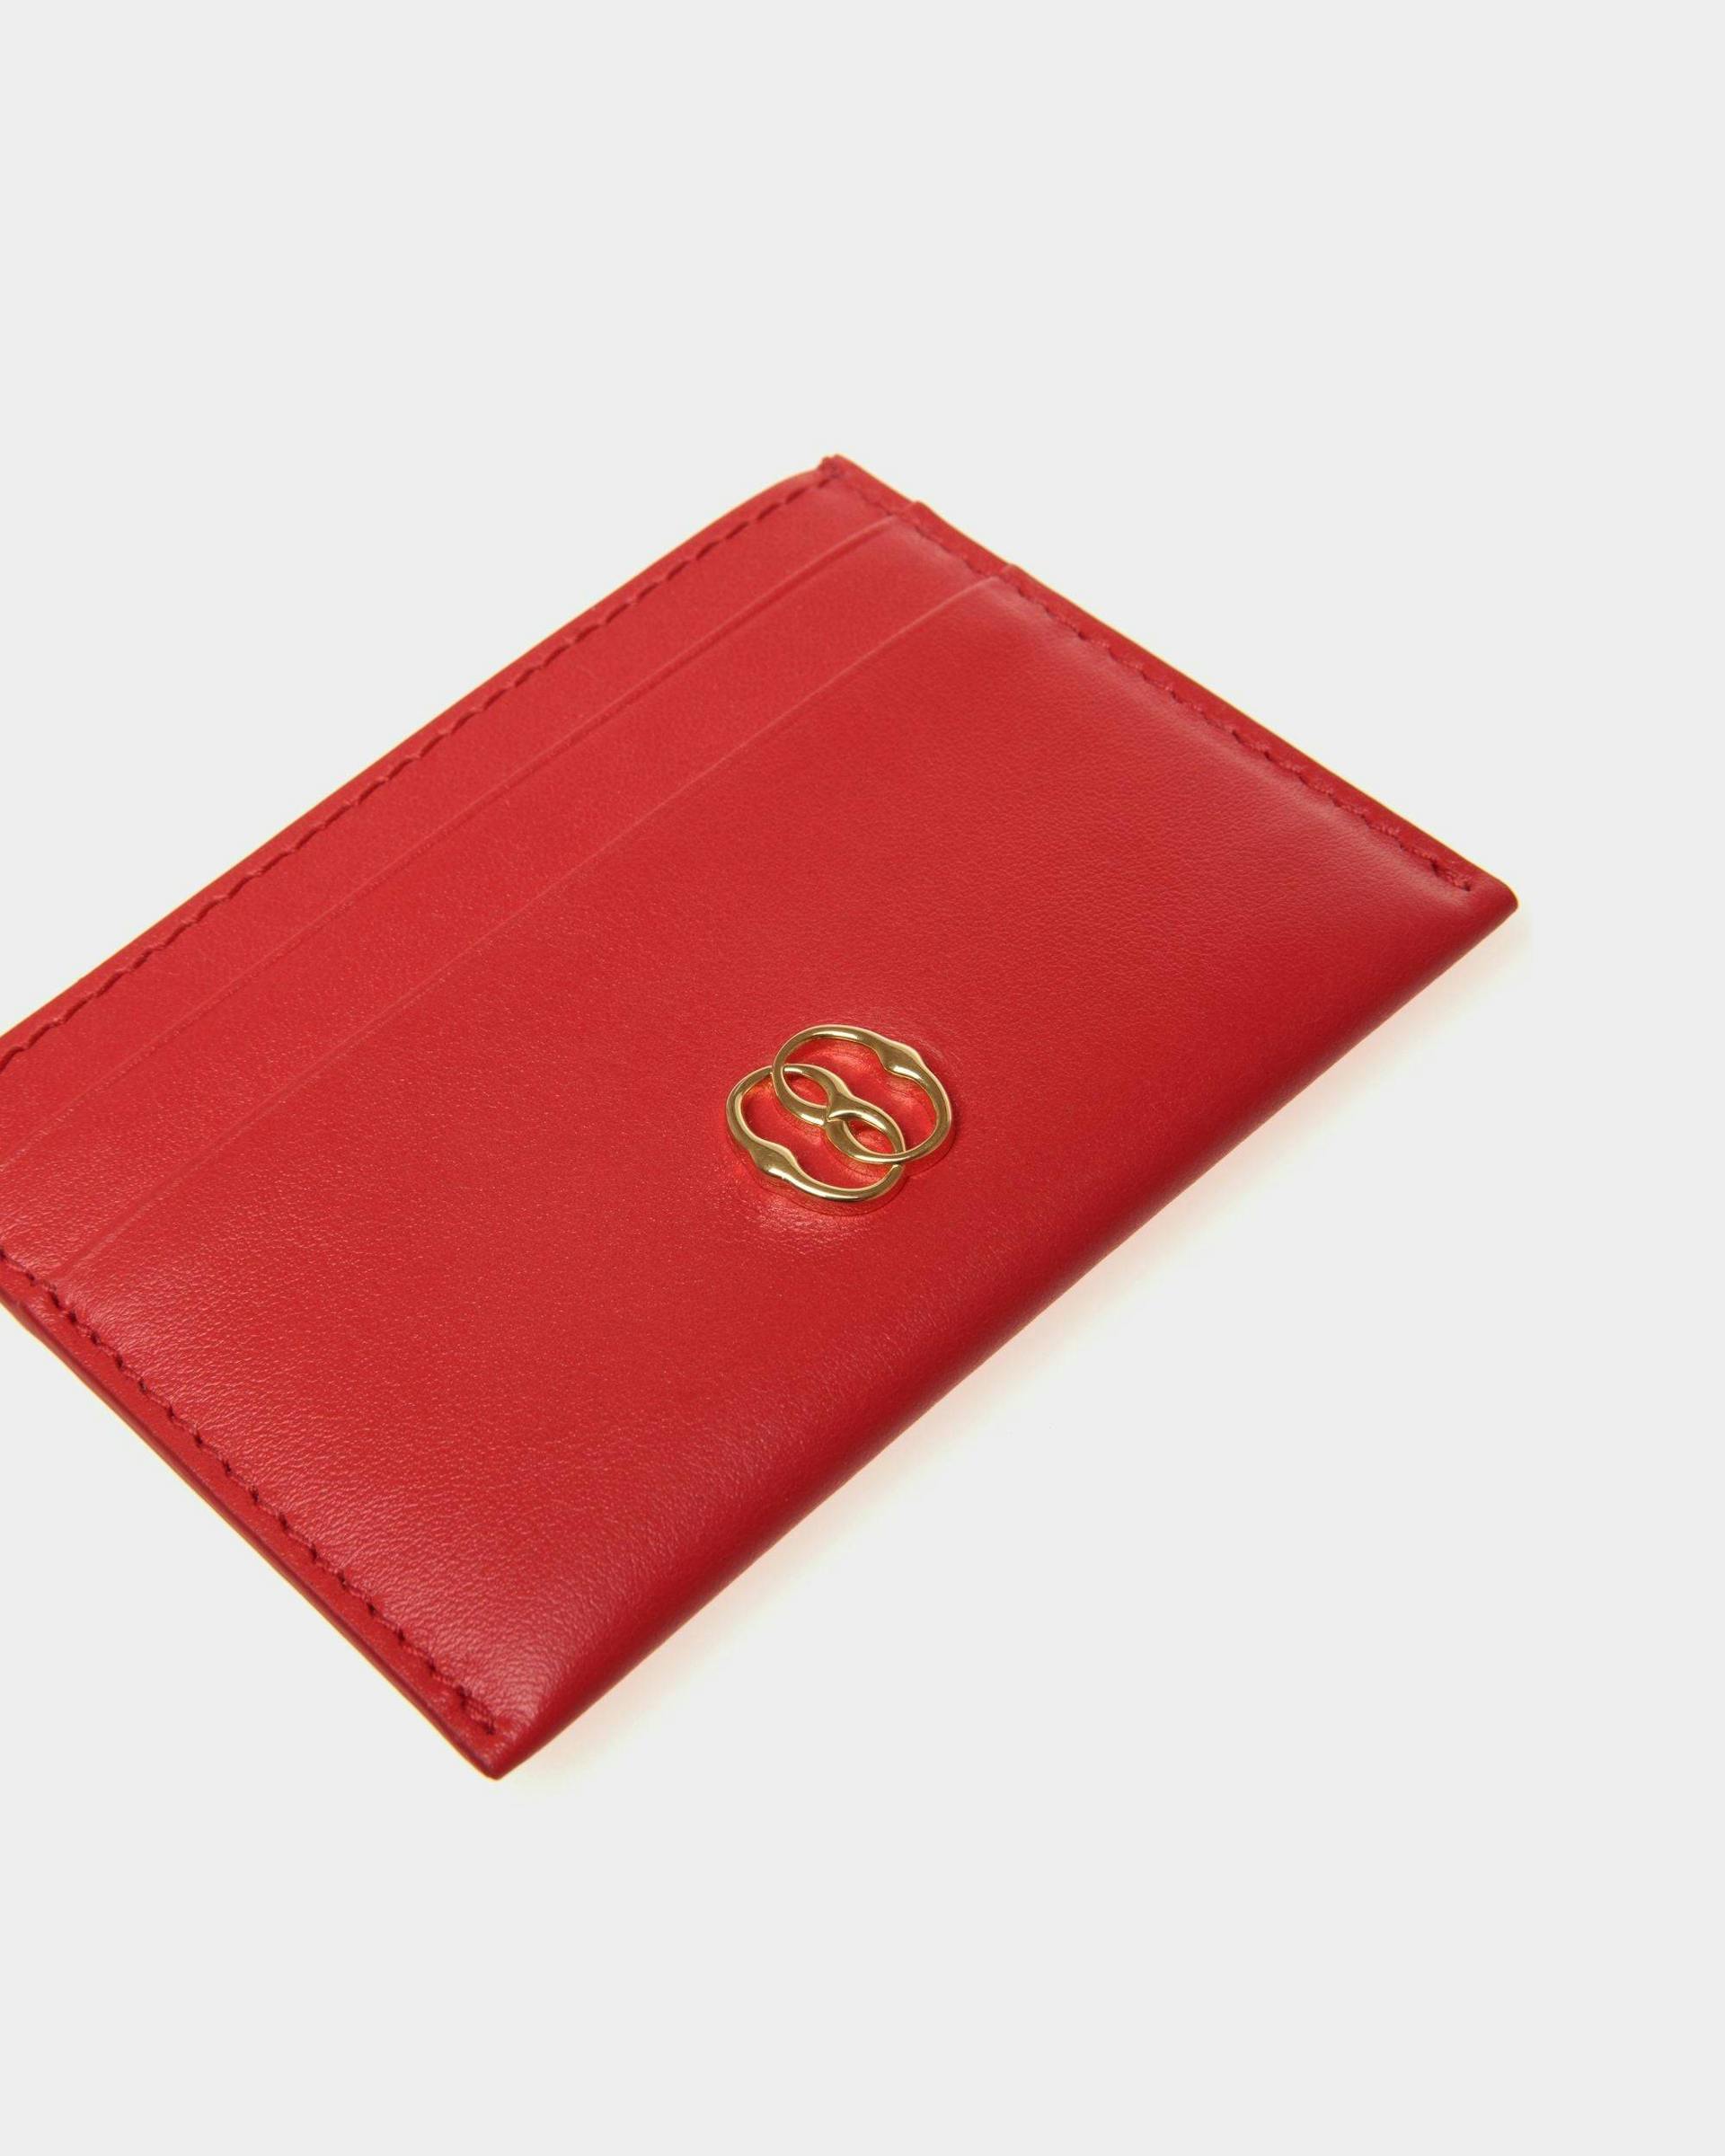 Women's Emblem Card Holder in Red Leather | Bally | Still Life Detail